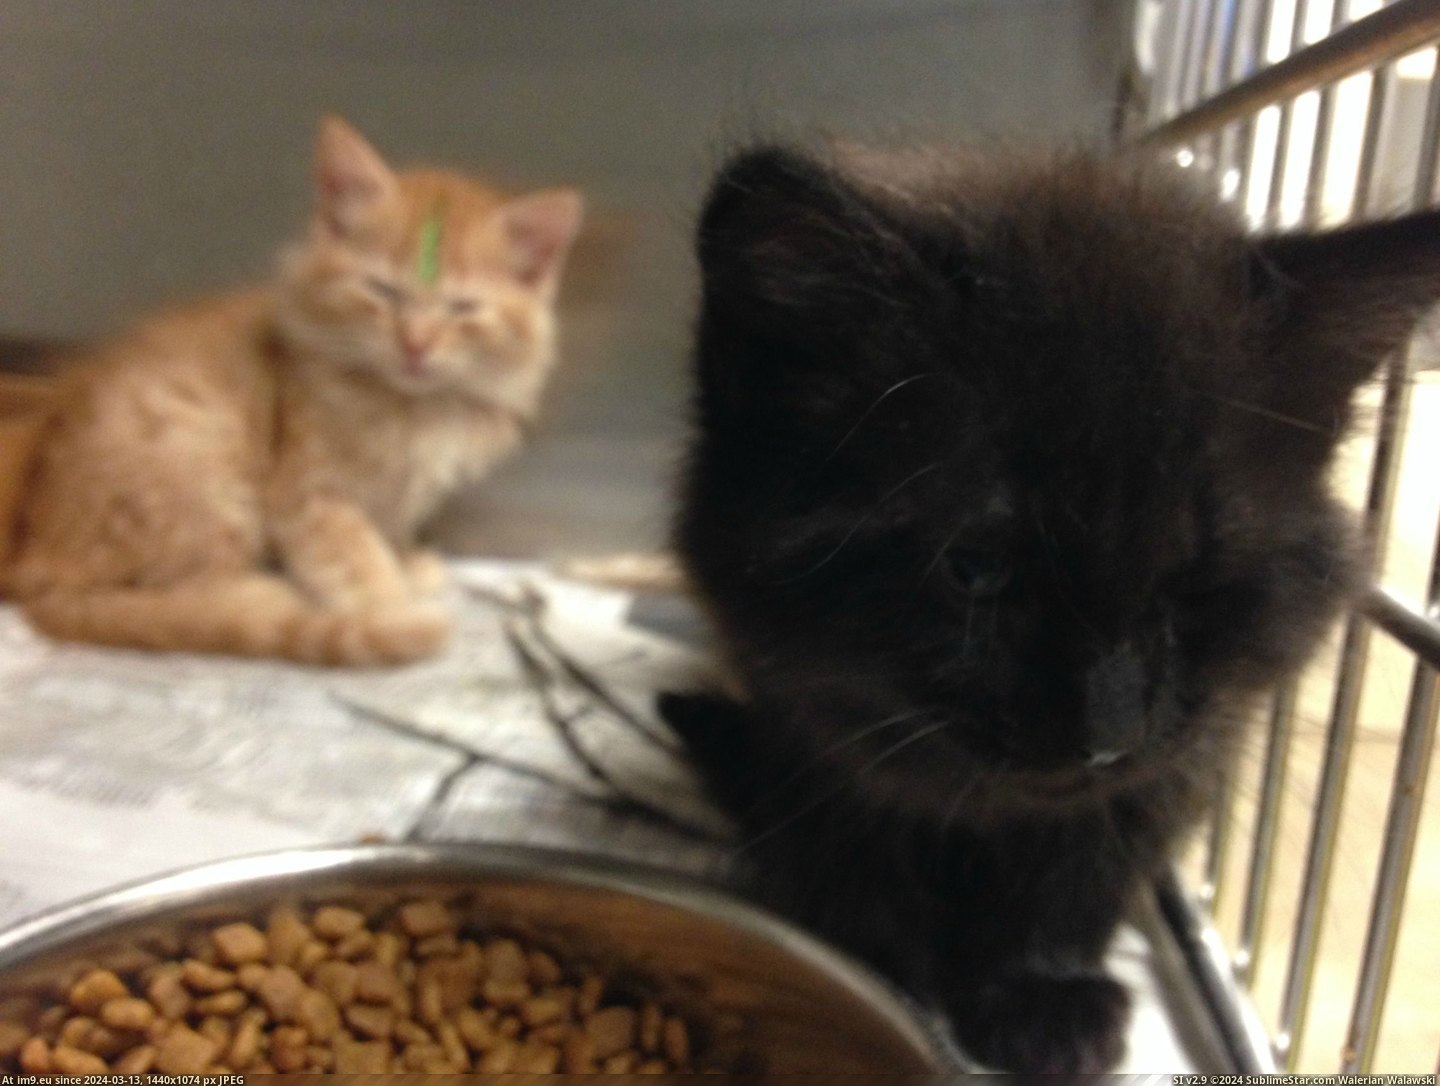 #Cats #Local #Kittens #Vet #Volunteer #Assistant #Shelt #Shelter #Access #Tech #Services [Cats] I volunteer as a tech assistant at my local shelter and have access into vet services. These are the kittens at the shelt Pic. (Image of album My r/CATS favs))